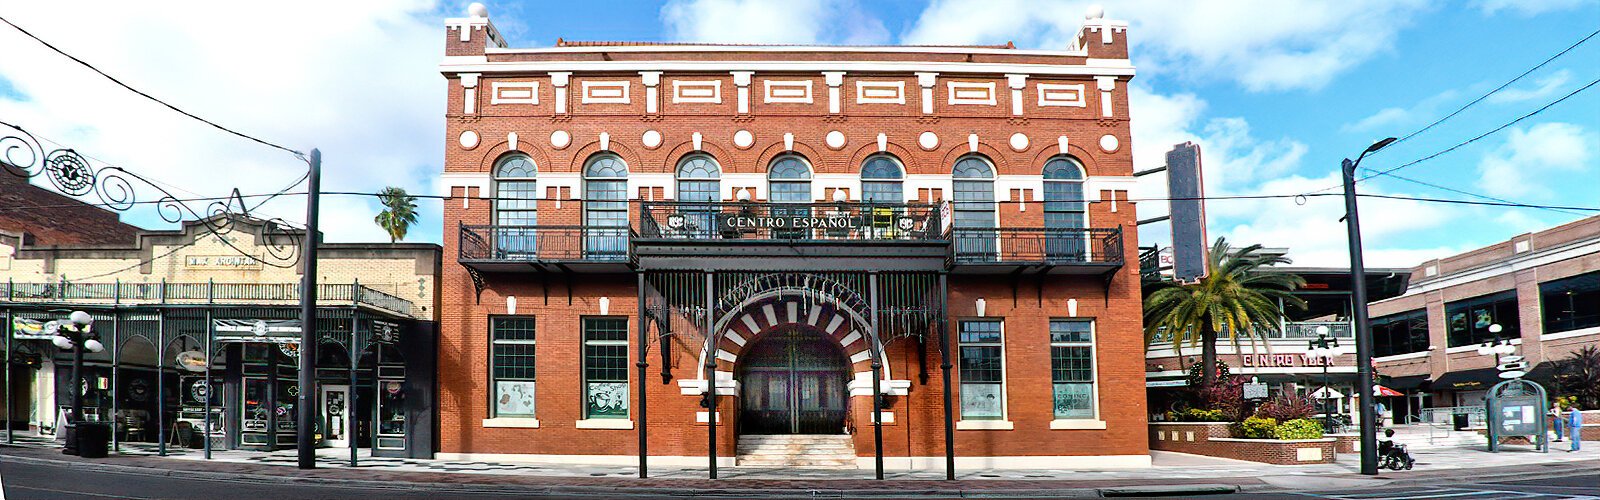  Recognized as a U.S. National Historic Landmark, the 1912 El Centro Espanol building in Ybor City first served as an ethnic and cultural clubhouse and is today part of a shopping and entertainment complex. 